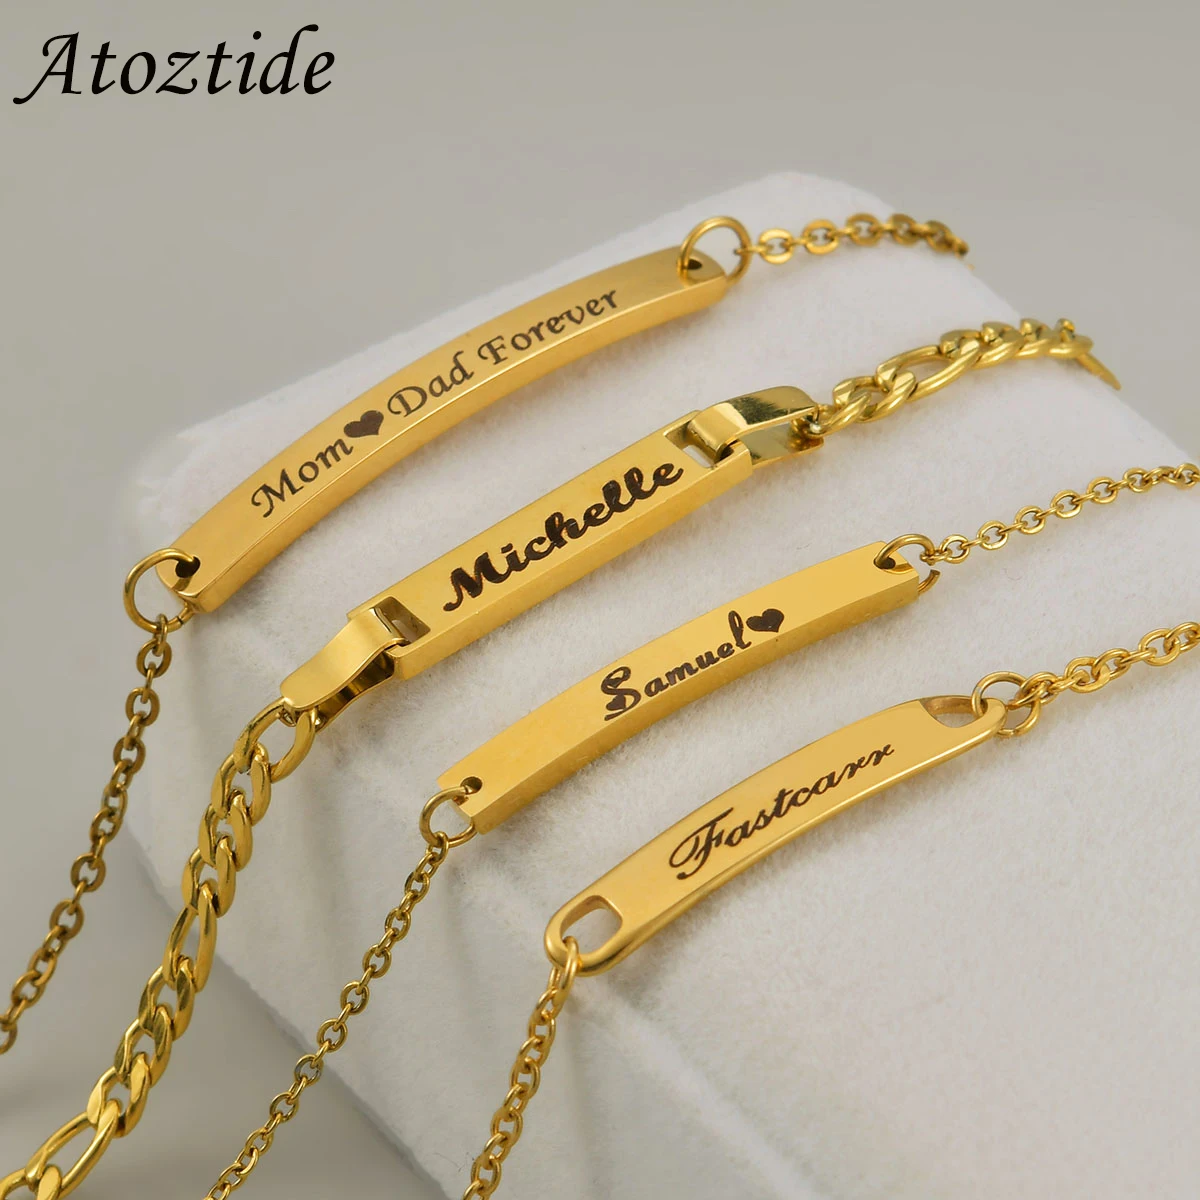 Atoztide Custom Baby Name Bar Nameplate Bracelet For Stainless Steel Women Kids Adjustable Link Chain Personalized Jewelry Gift bracelet s925 silver 14mm extending buckle two rows cuban link iced out hip hop moissanite link chain jewelry women men gifts